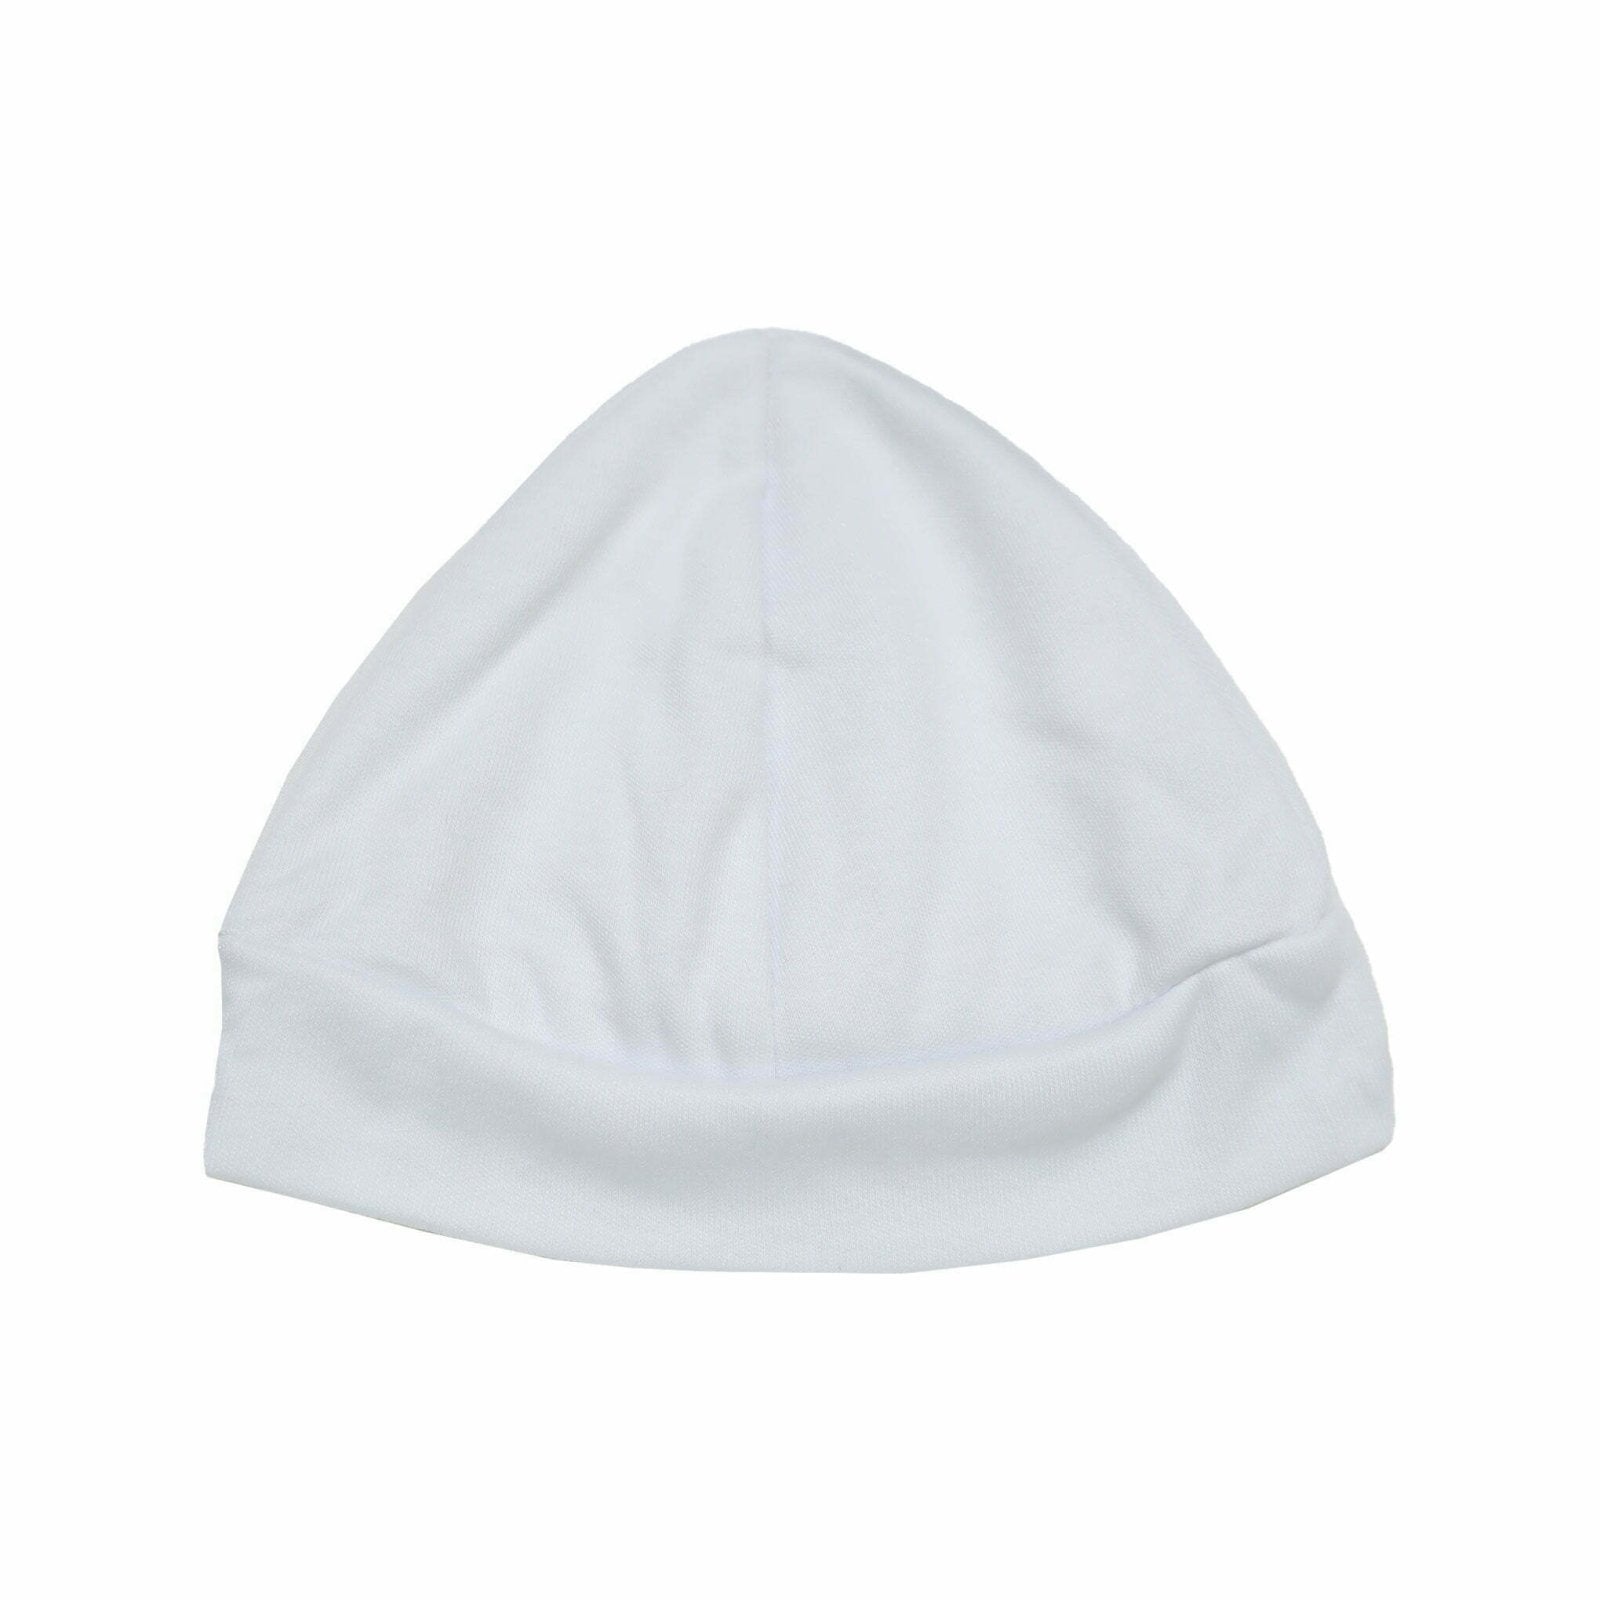 Baby Cap Off-White Color by Little Darling